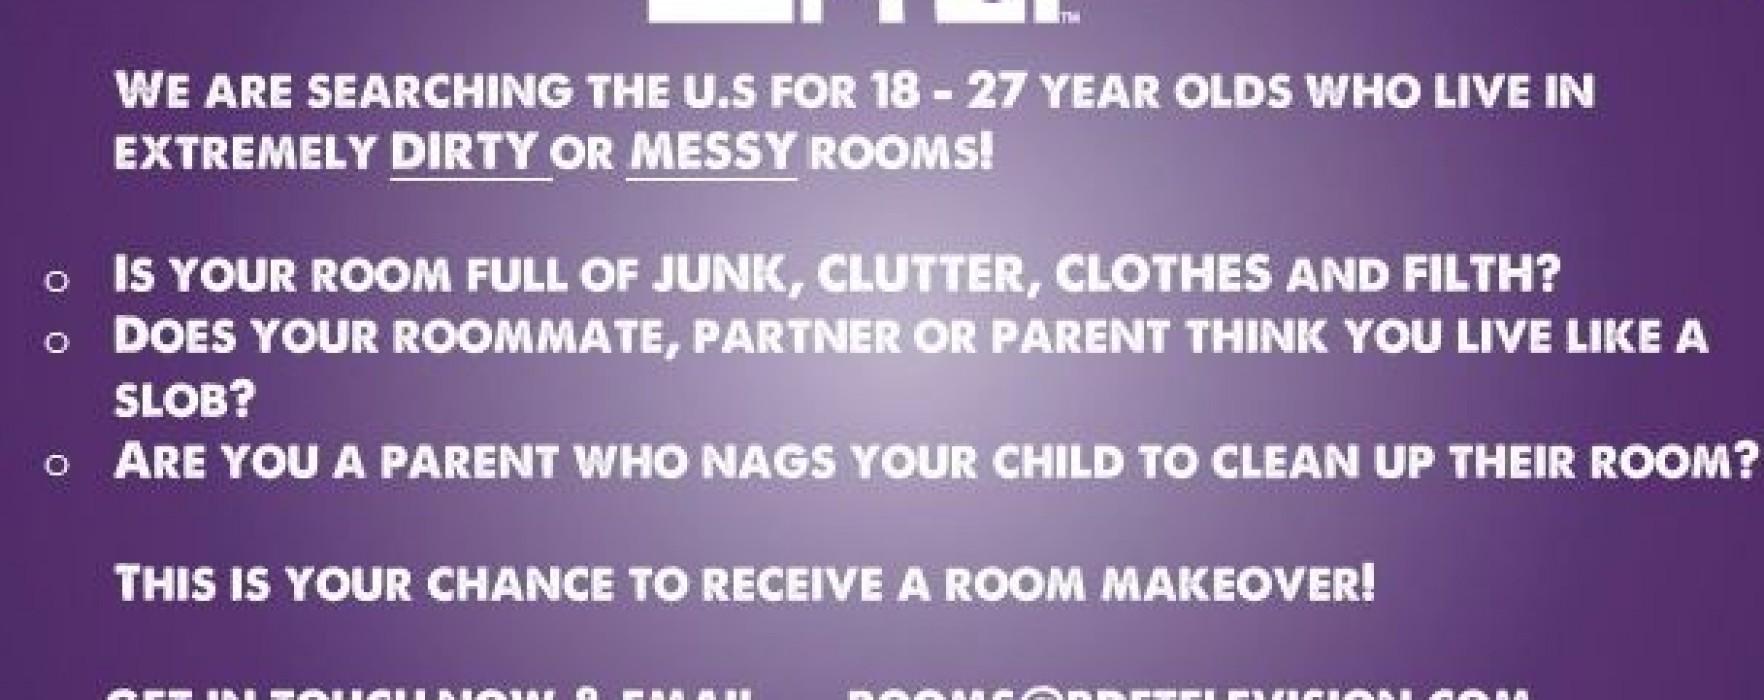 MTV are looking for young people who live in messy rooms!